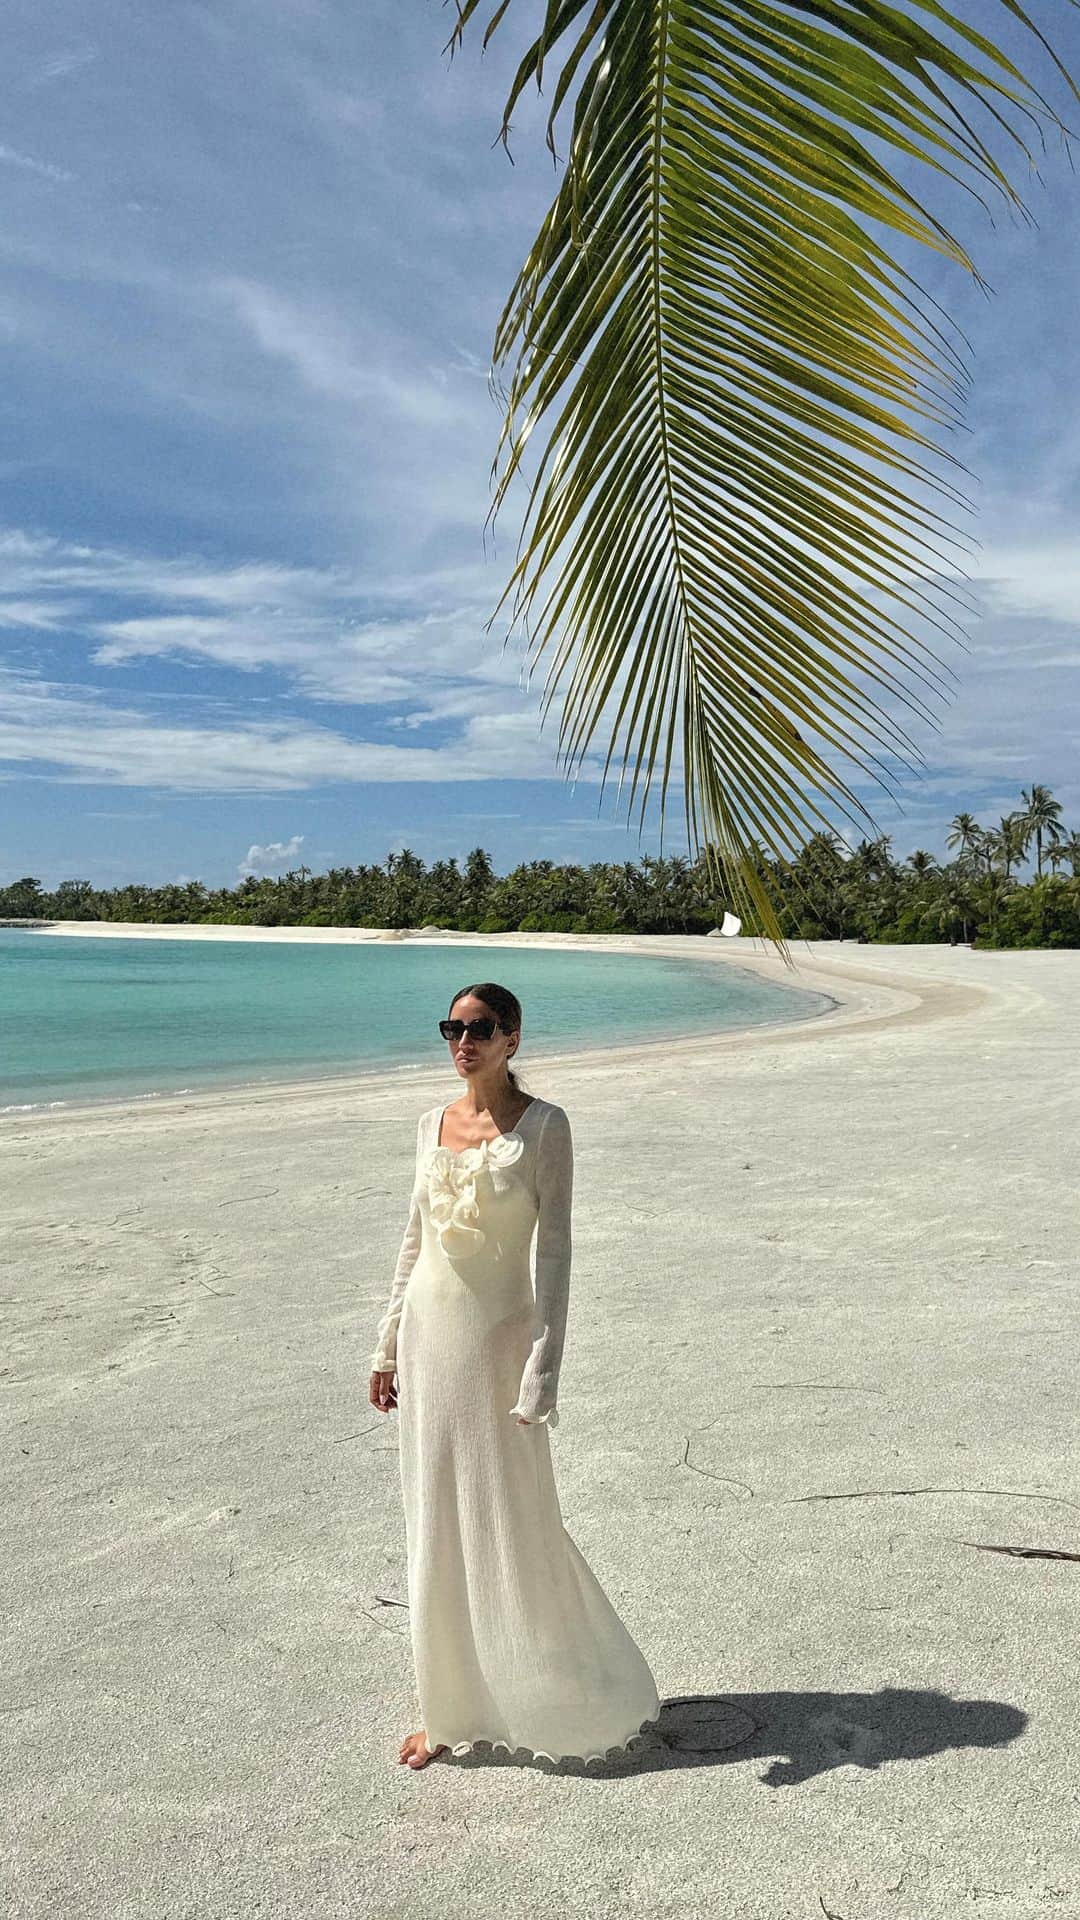 Tamara Kalinicのインスタグラム：「This nature, the island, the beautiful resort. So far we ate in more than 6 different restaurants, we swam, read, explored, saw sharks, dolphins and thousands of their other friends. Touched down in heaven @patinamaldives , thank you for flawless organisation @maldivesbysanjapapic #PatinaMaldives」